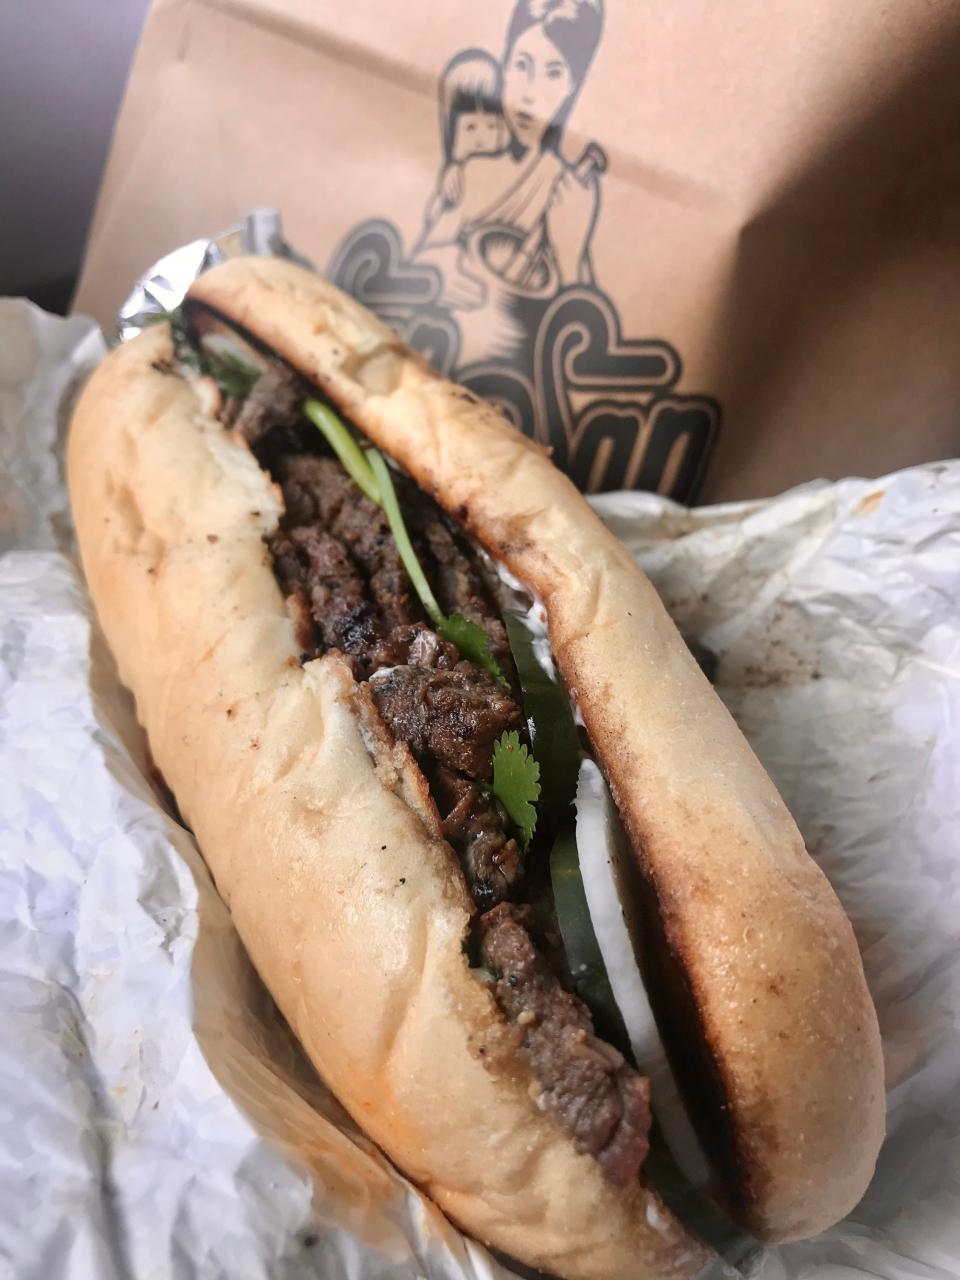 The grilled flavor of charred skirt steak adds an extra dimension to the banh mi-style sandwich from SapSap in Mount Pleasant.